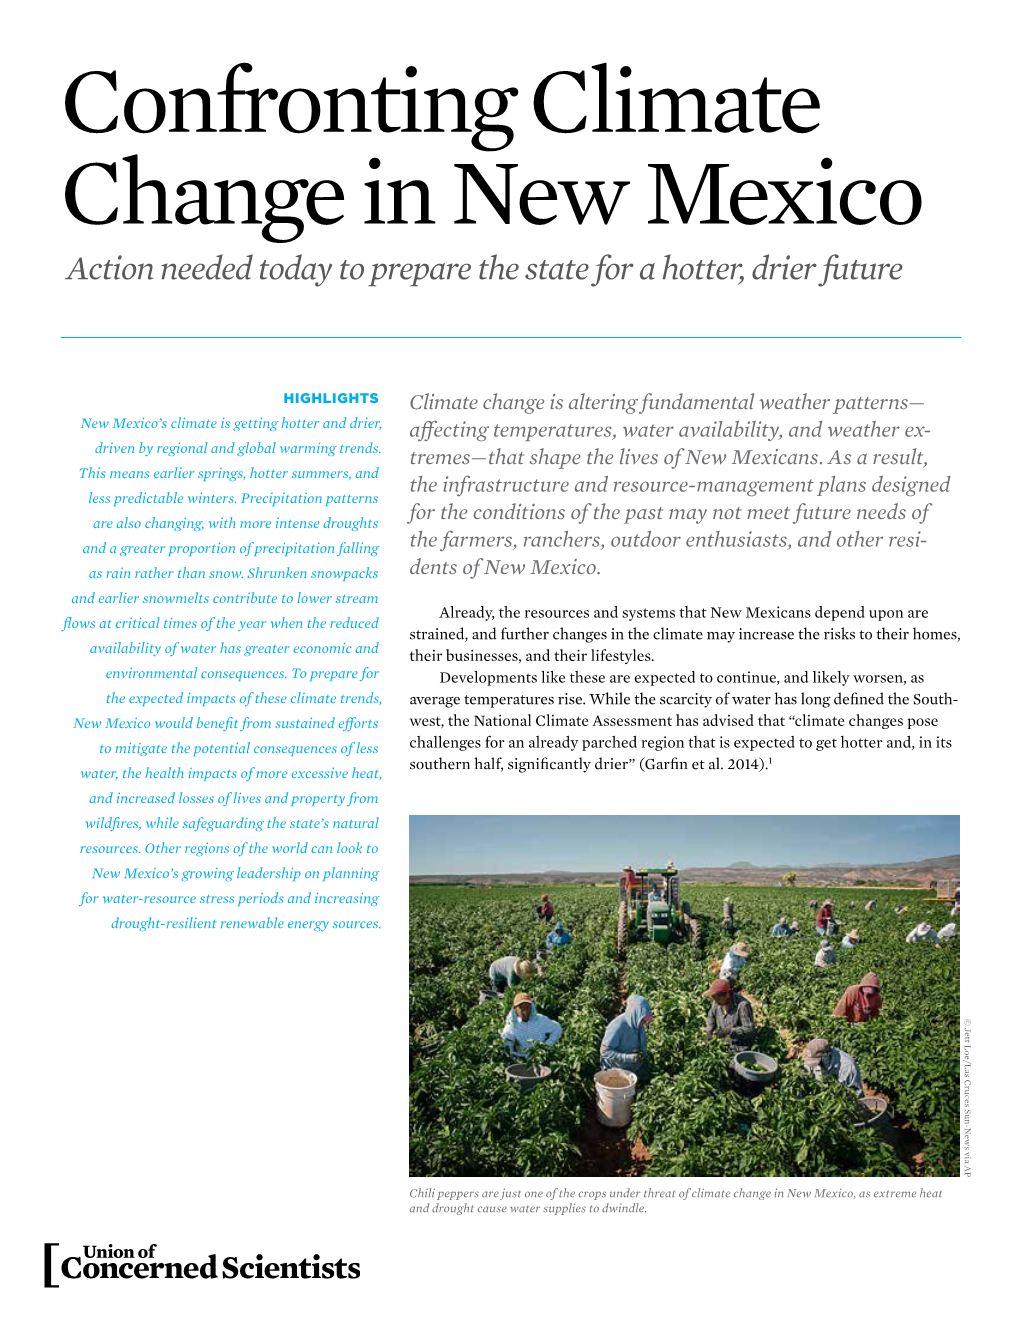 Confronting Climate Change in New Mexico Action Needed Today to Prepare the State for a Hotter, Drier Future